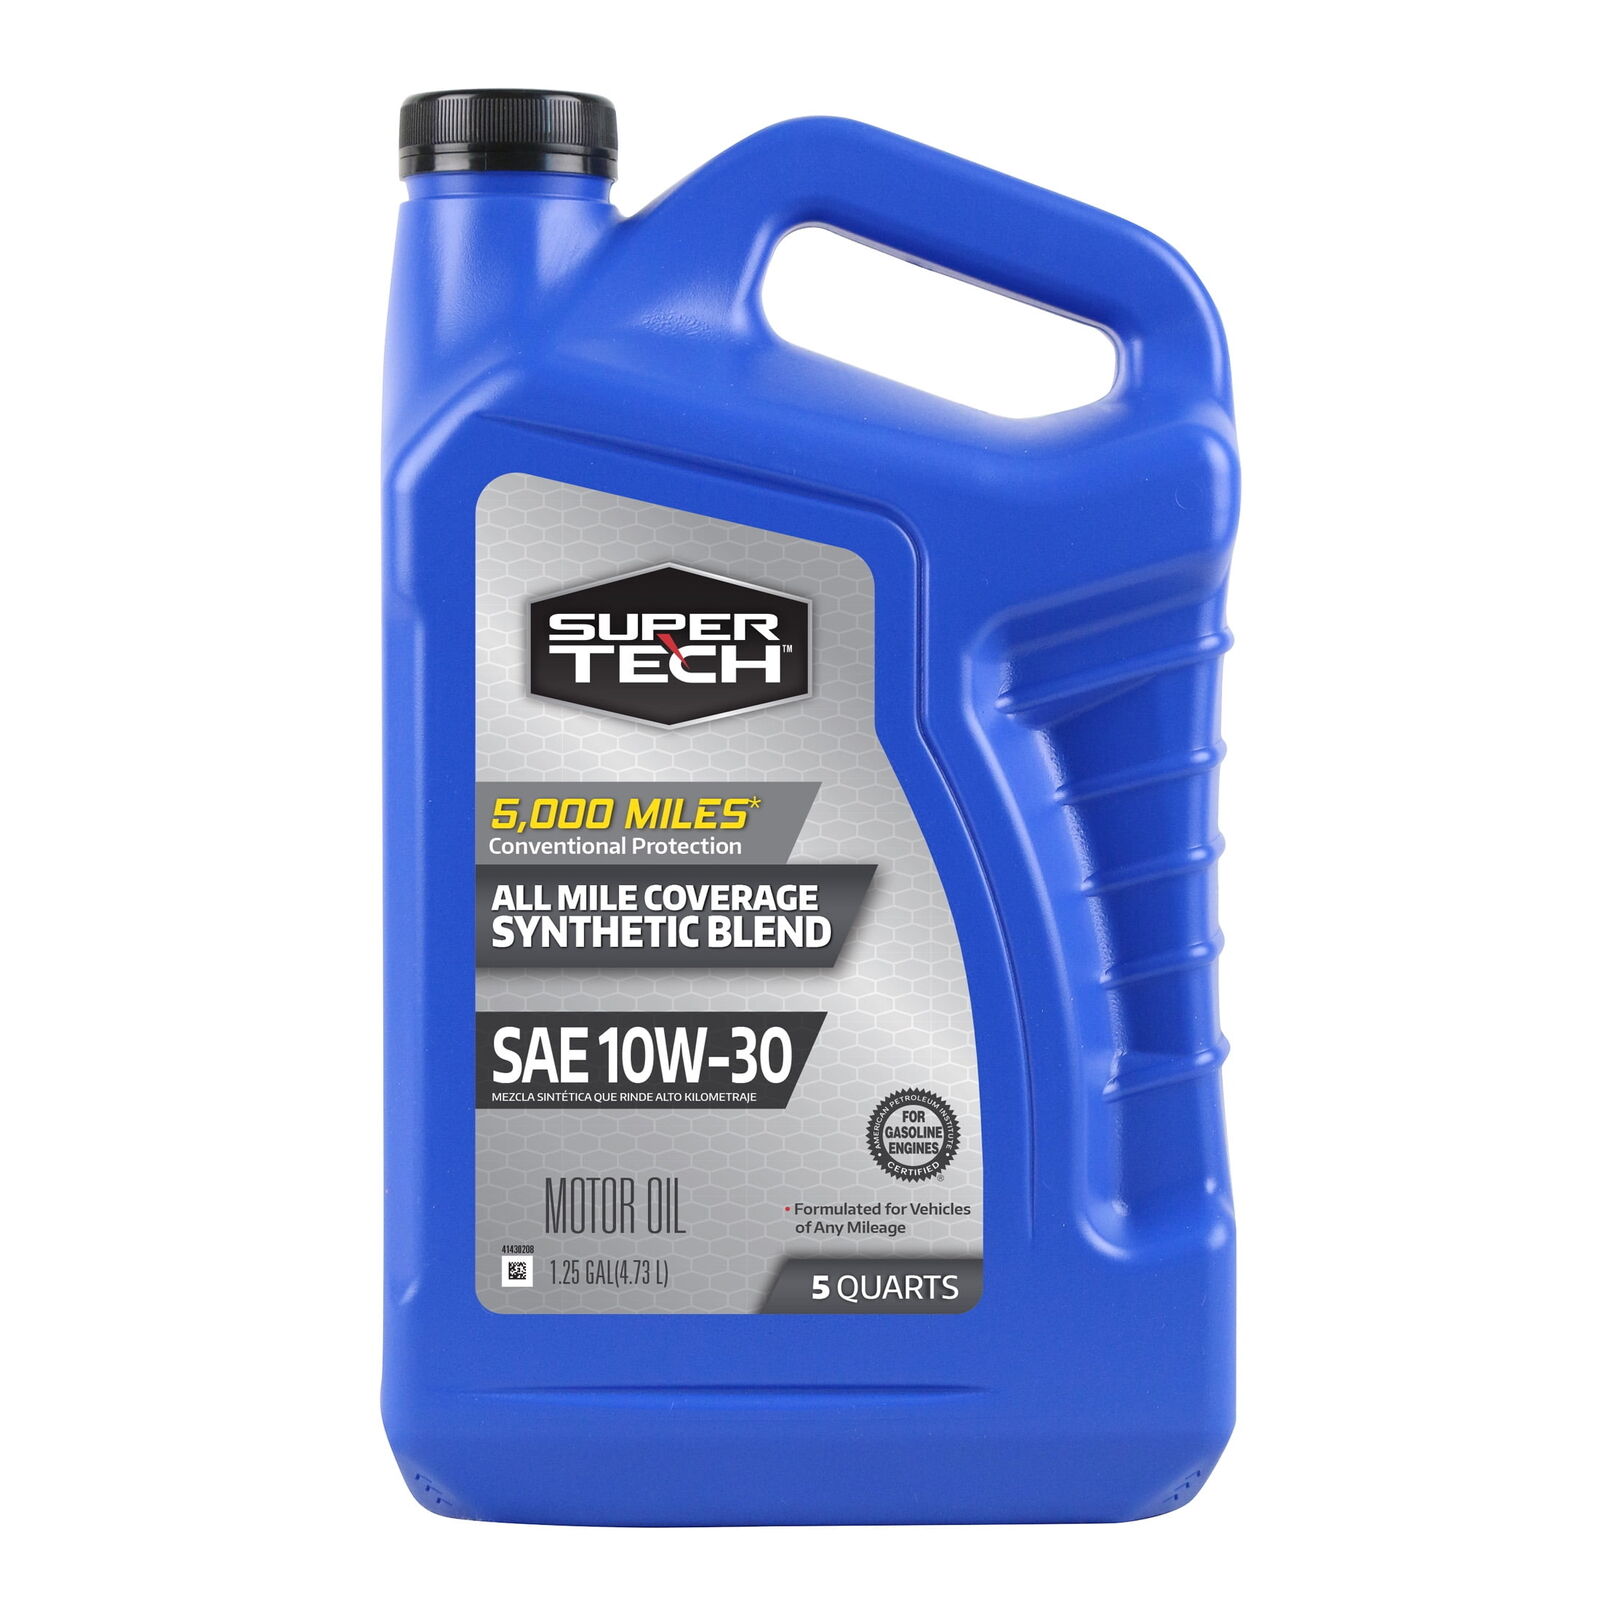 All Mileage Synthetic Blend Motor Oil SAE 10W-30, 5 Quarts